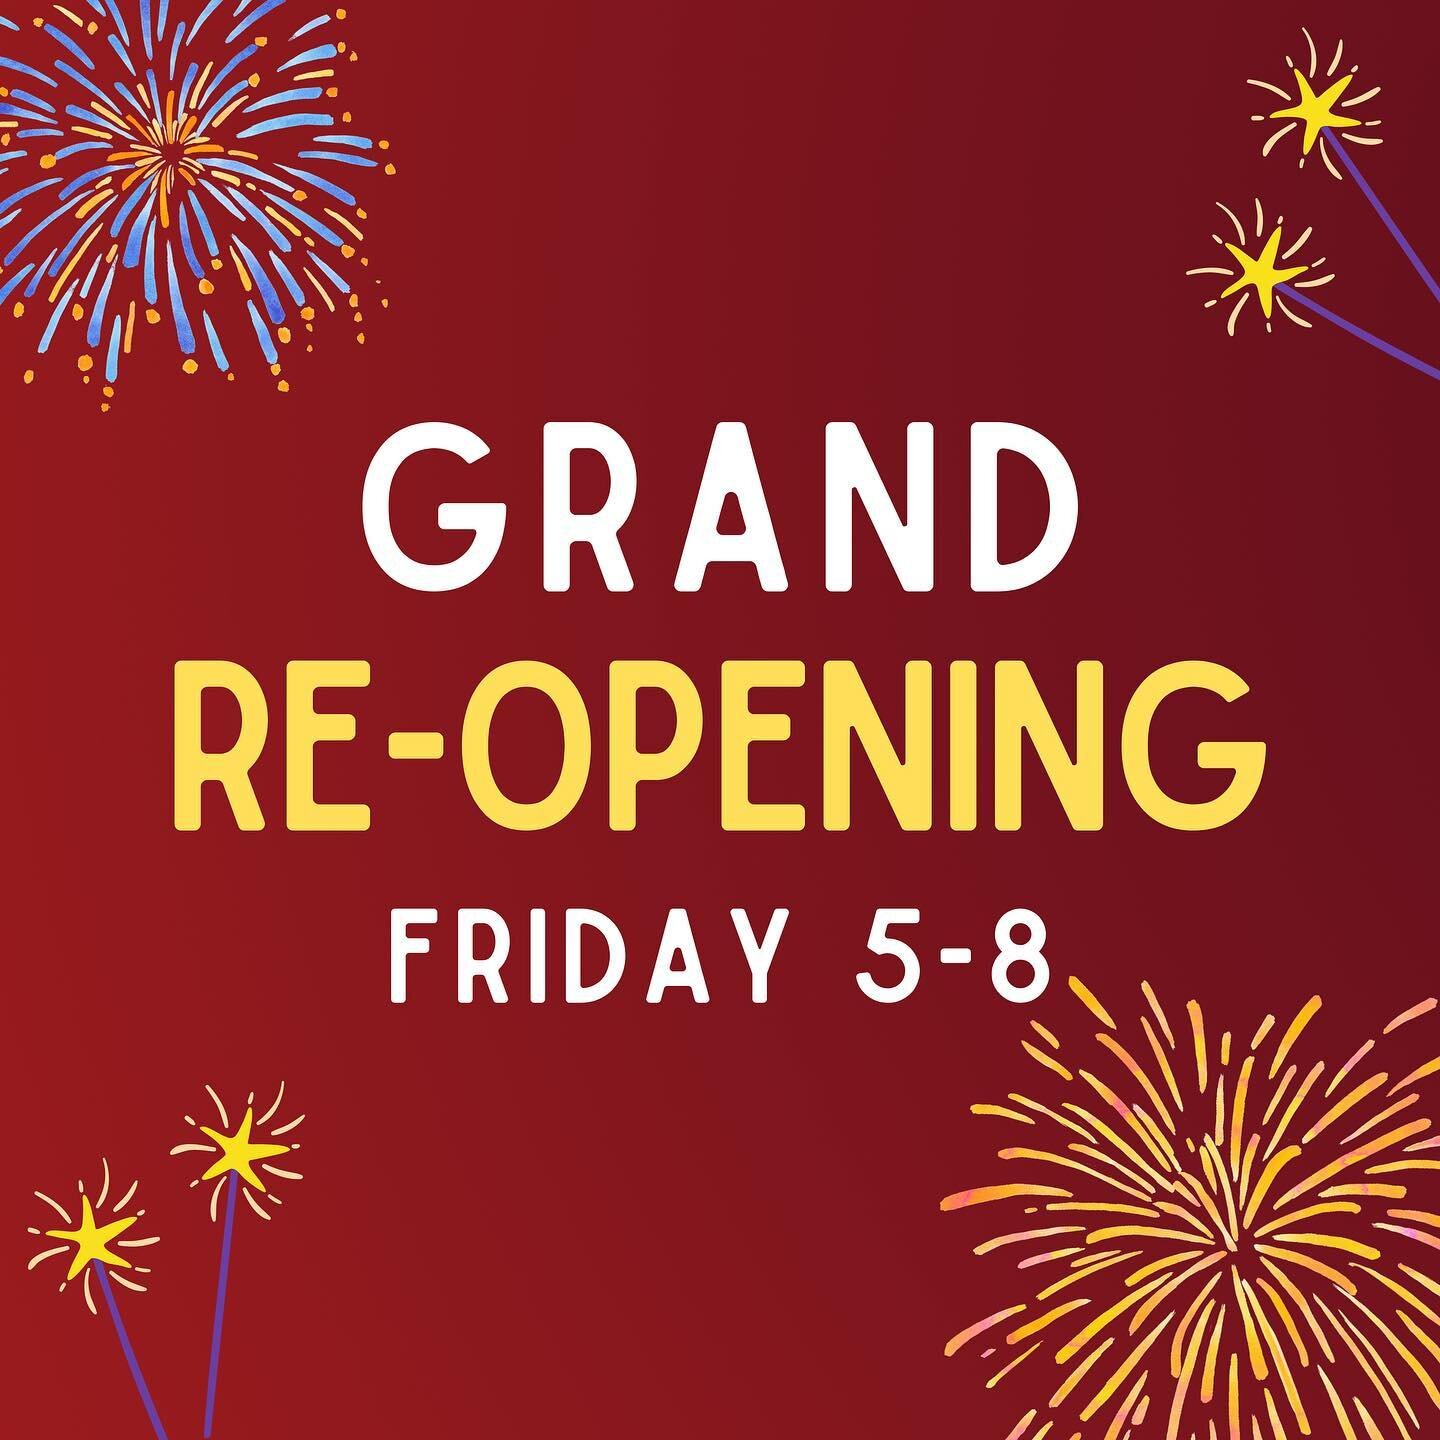 You guys! It&rsquo;s finally here! Join us for our grand re-opening: Friday, March 3rd from 5-8!⁣
⁣
Featuring local artists:⁣
@aeronautdesigns 
@cameoappearance 
⁣
Plus all the @navonejewelry you&rsquo;ve been dreaming about!